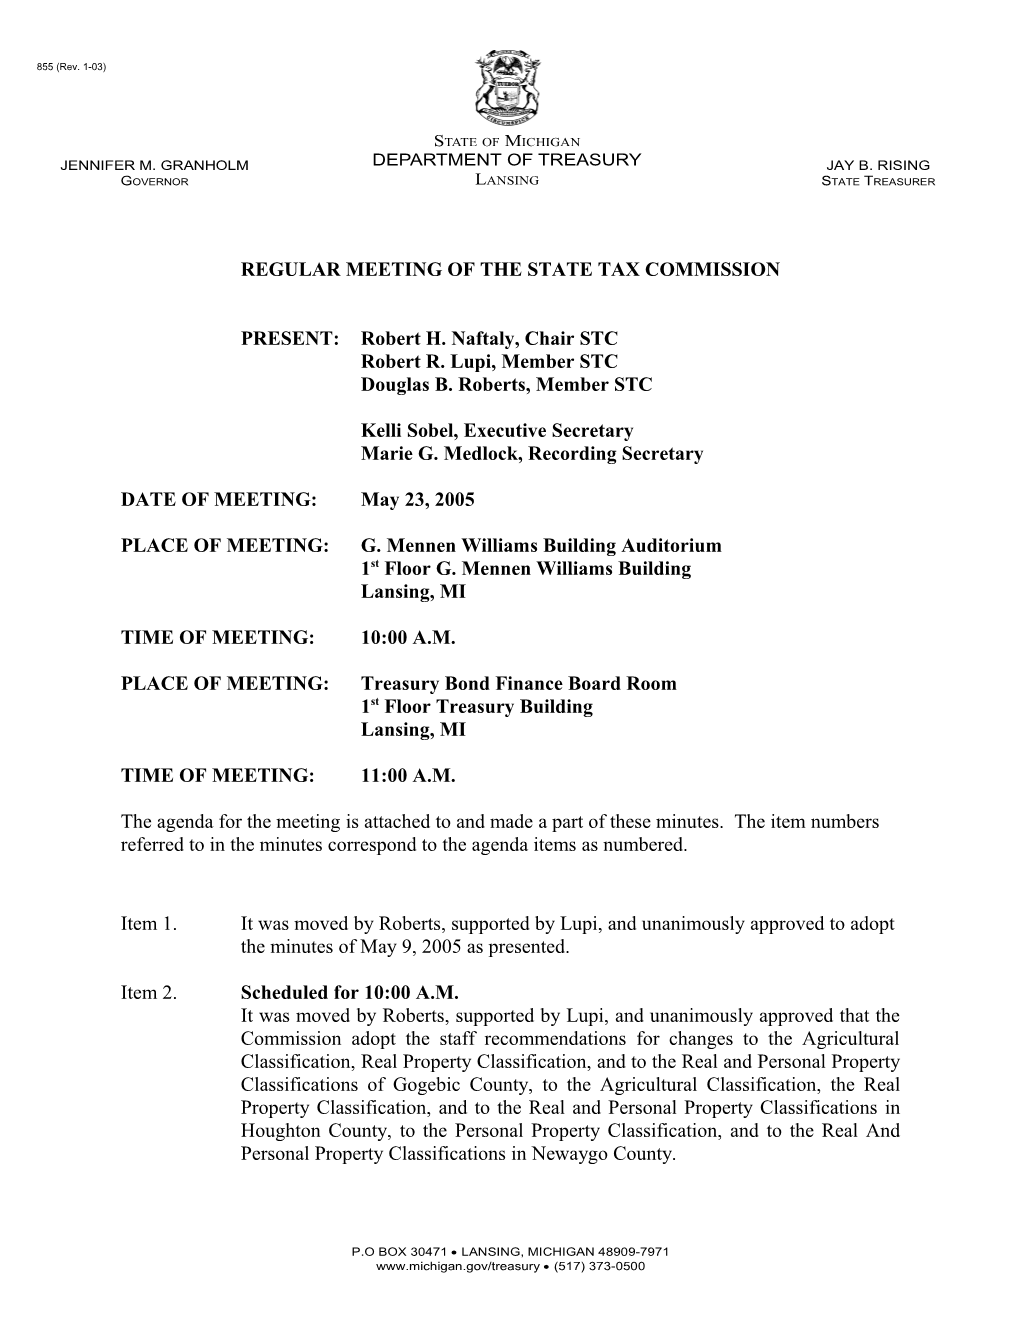 Minutes of the Regular Meeting of the State Tax Commission